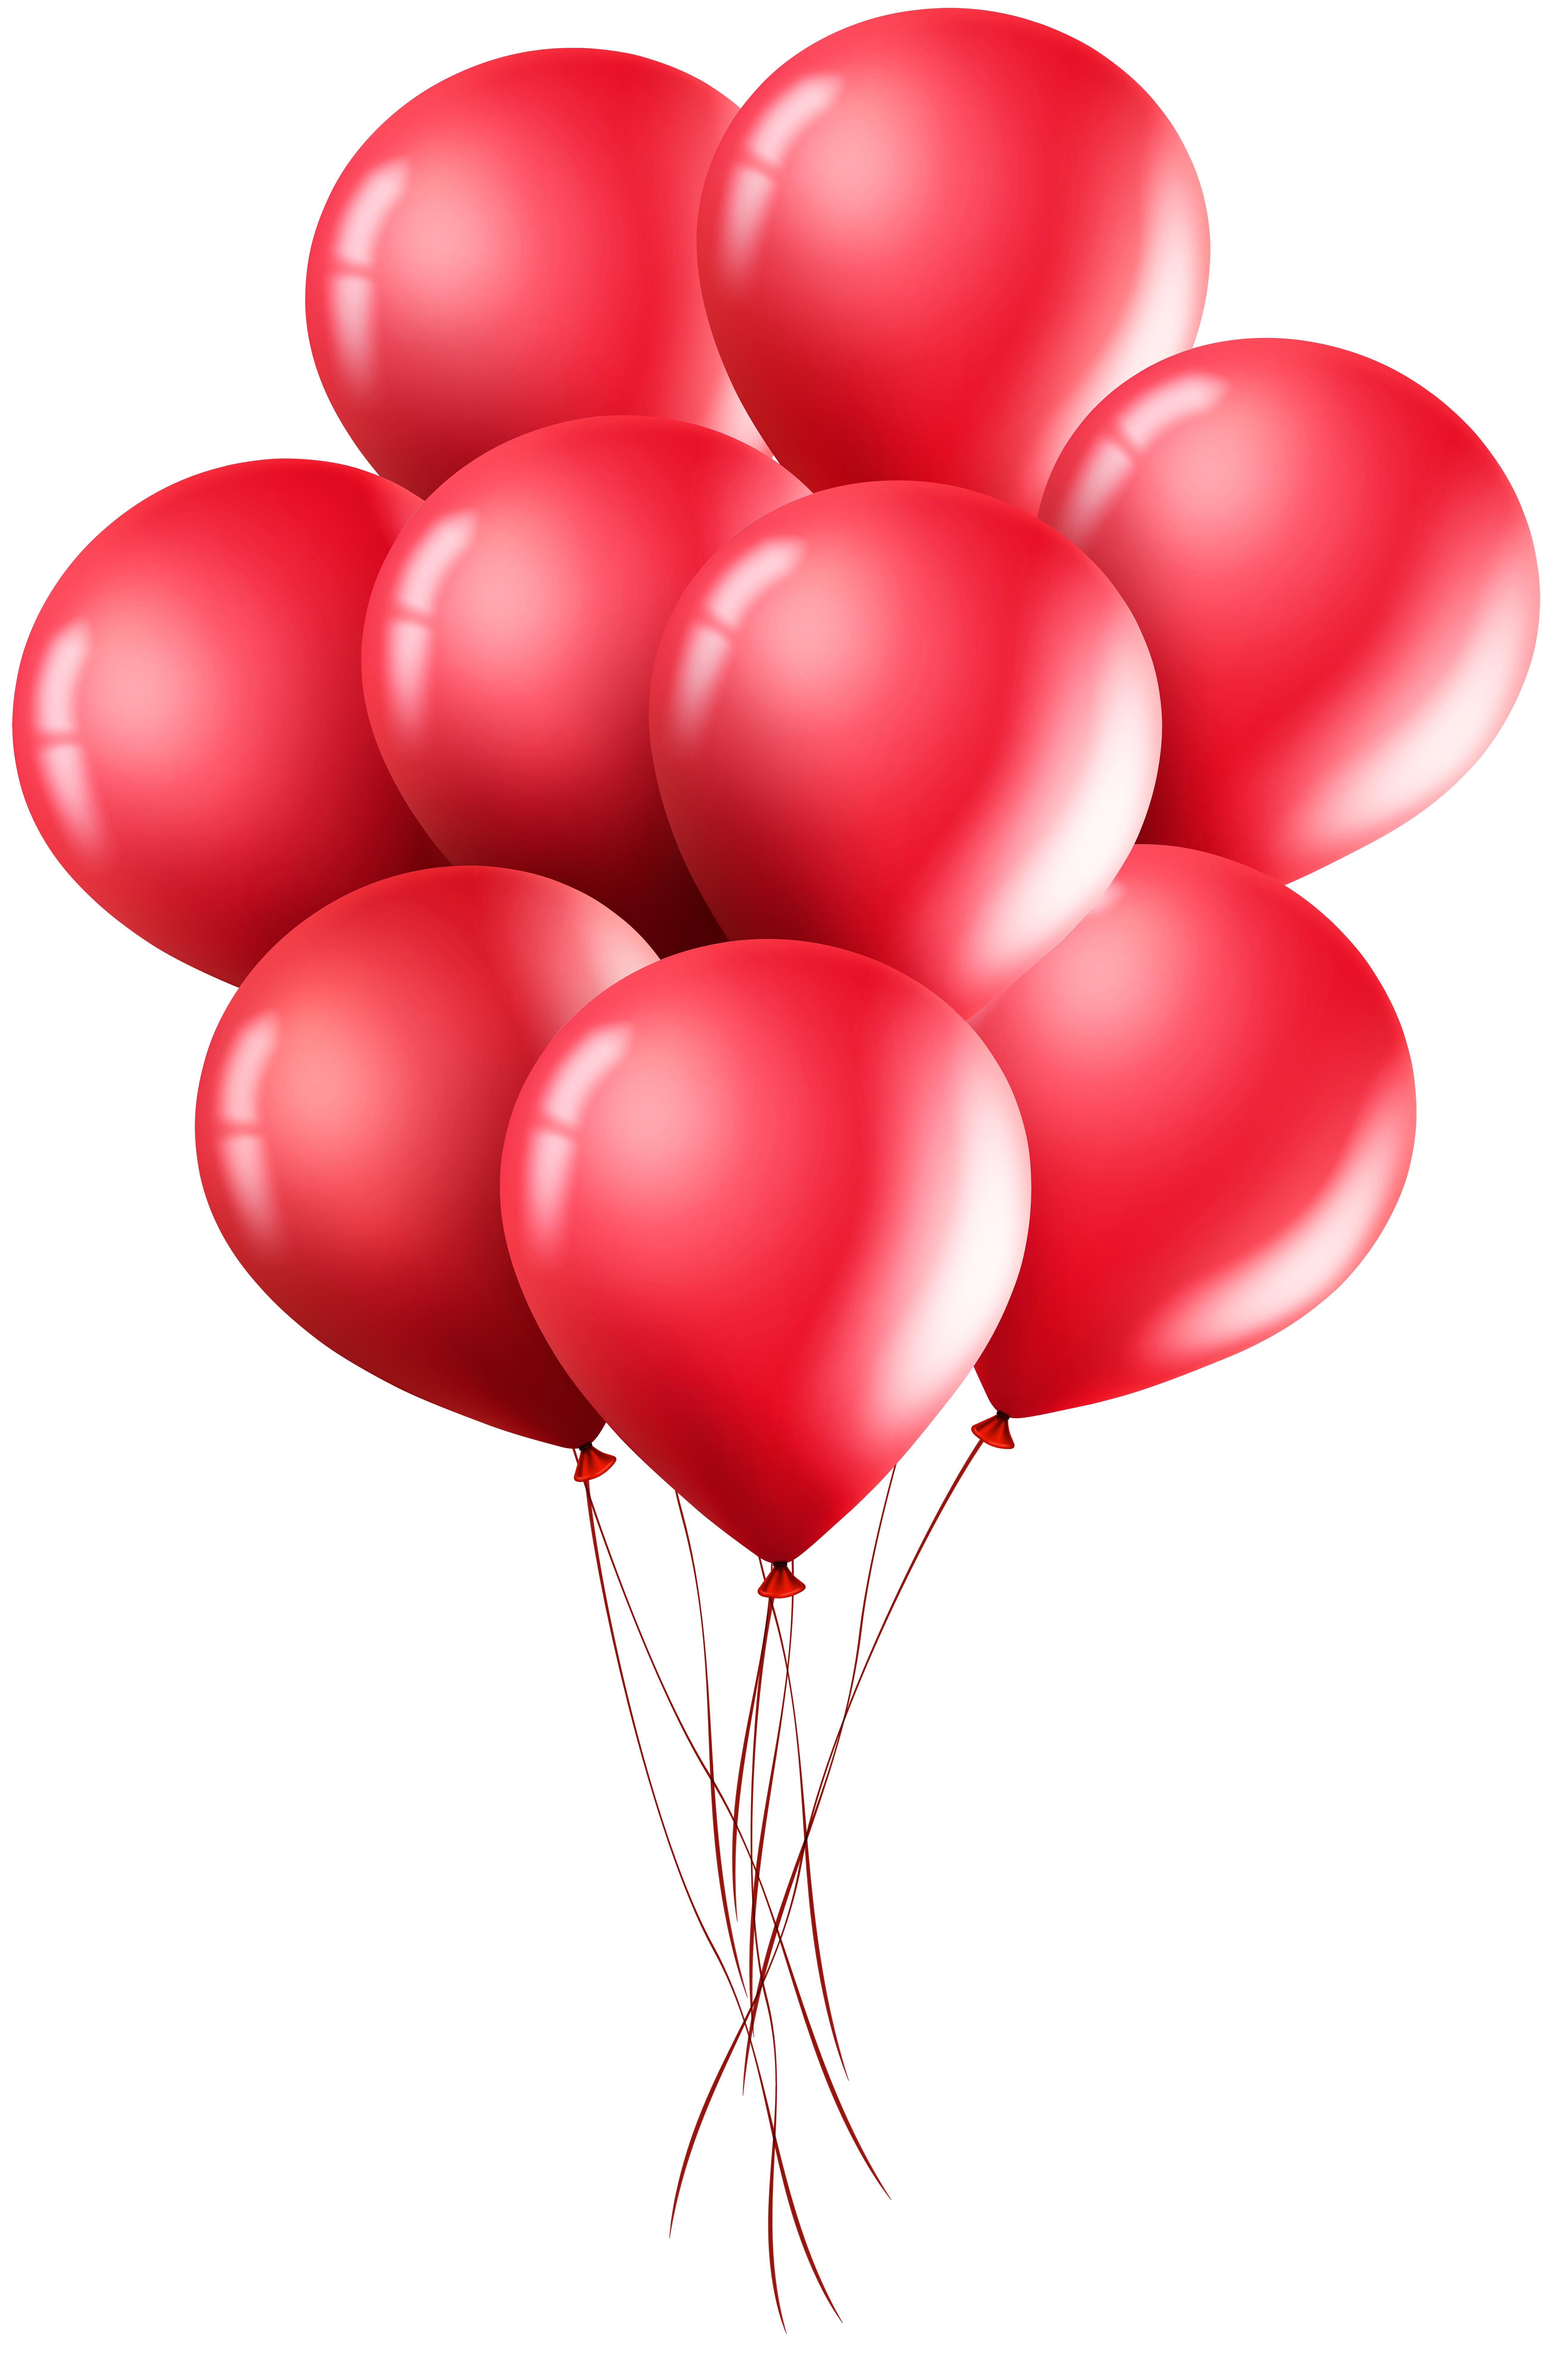 Red Balloons PNG Clip Art Image.